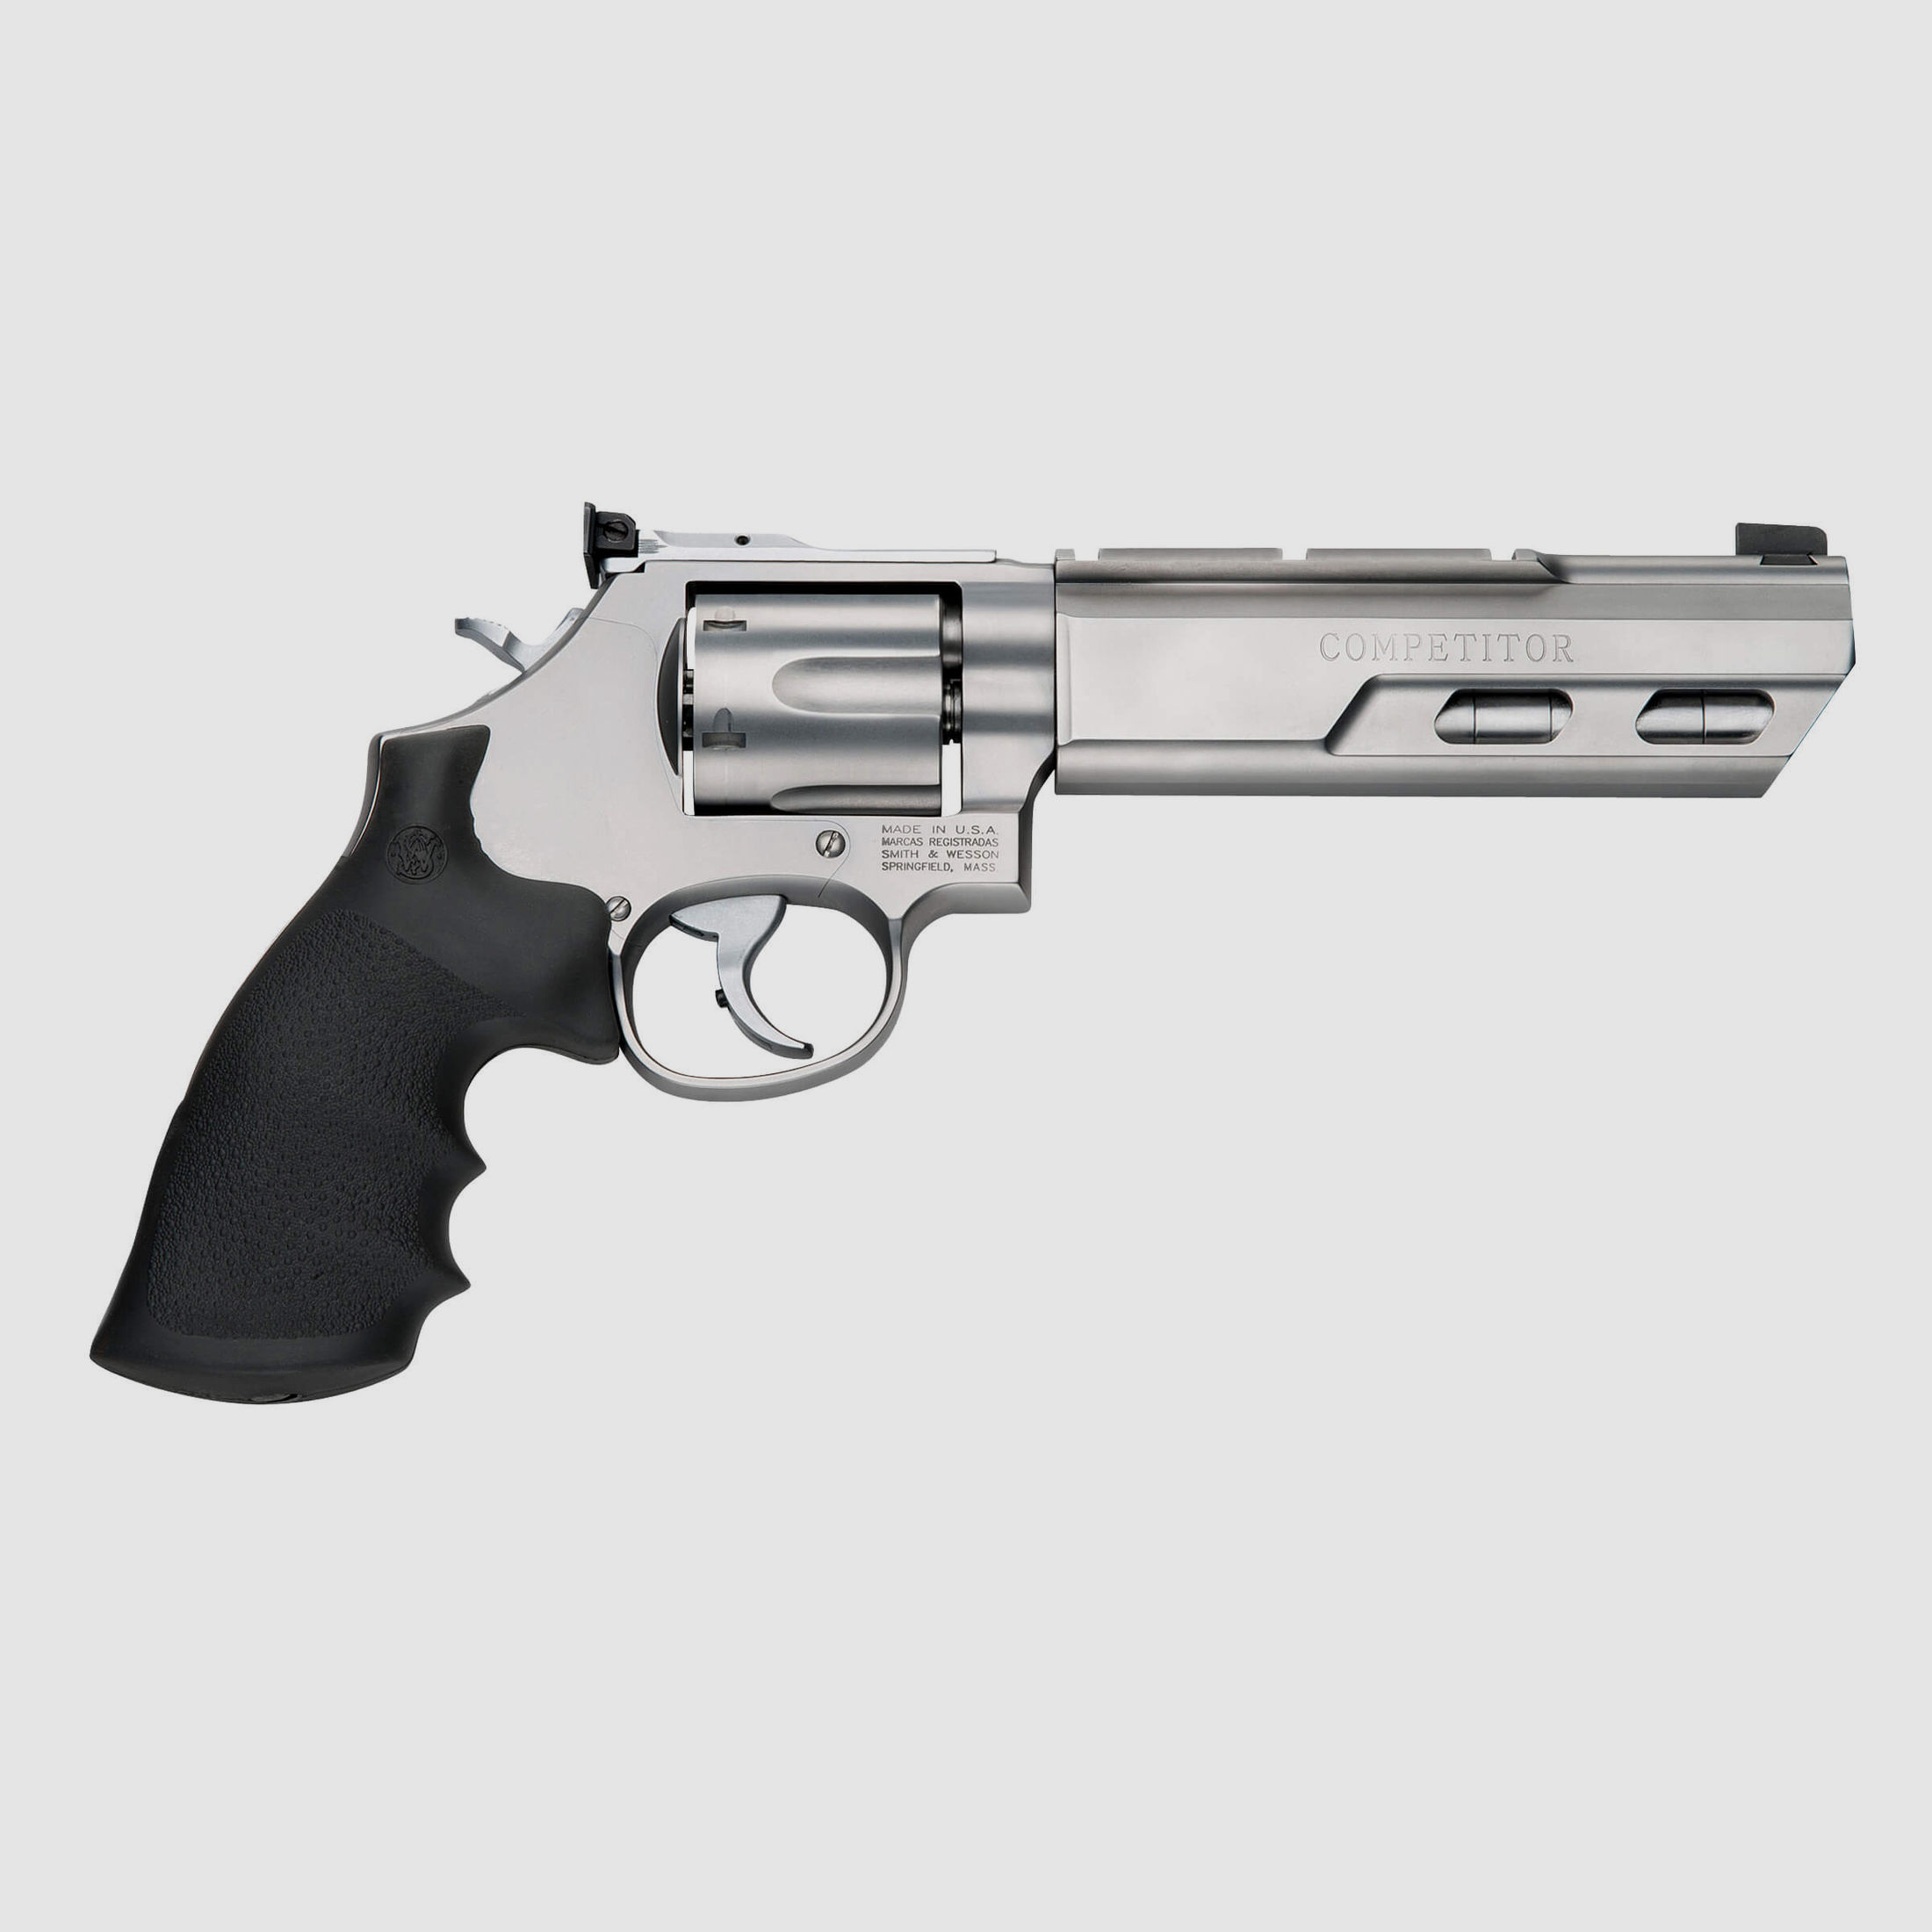 Smith & Wesson Mod. 629 Competitor 6" Stainless Kaliber .44 Magnum